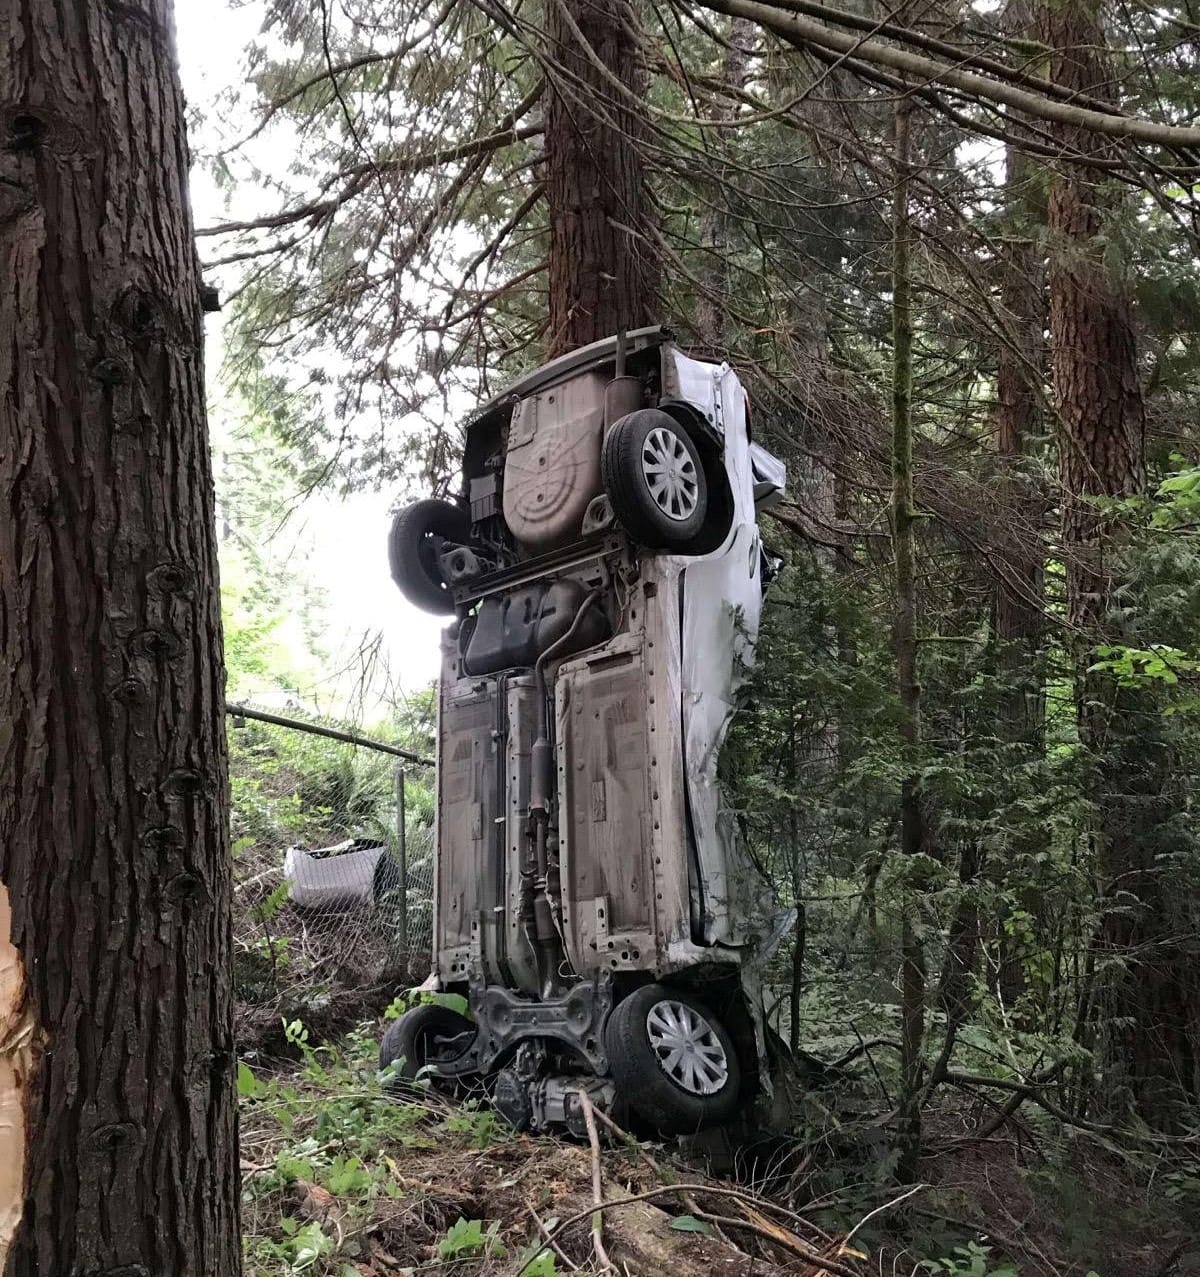 Clark County Fire District 3 firefighters responded to the scene of a crash at 22100 N.E. Lucia Falls Road on Thursday morning. The driver walked away with minor injuries.